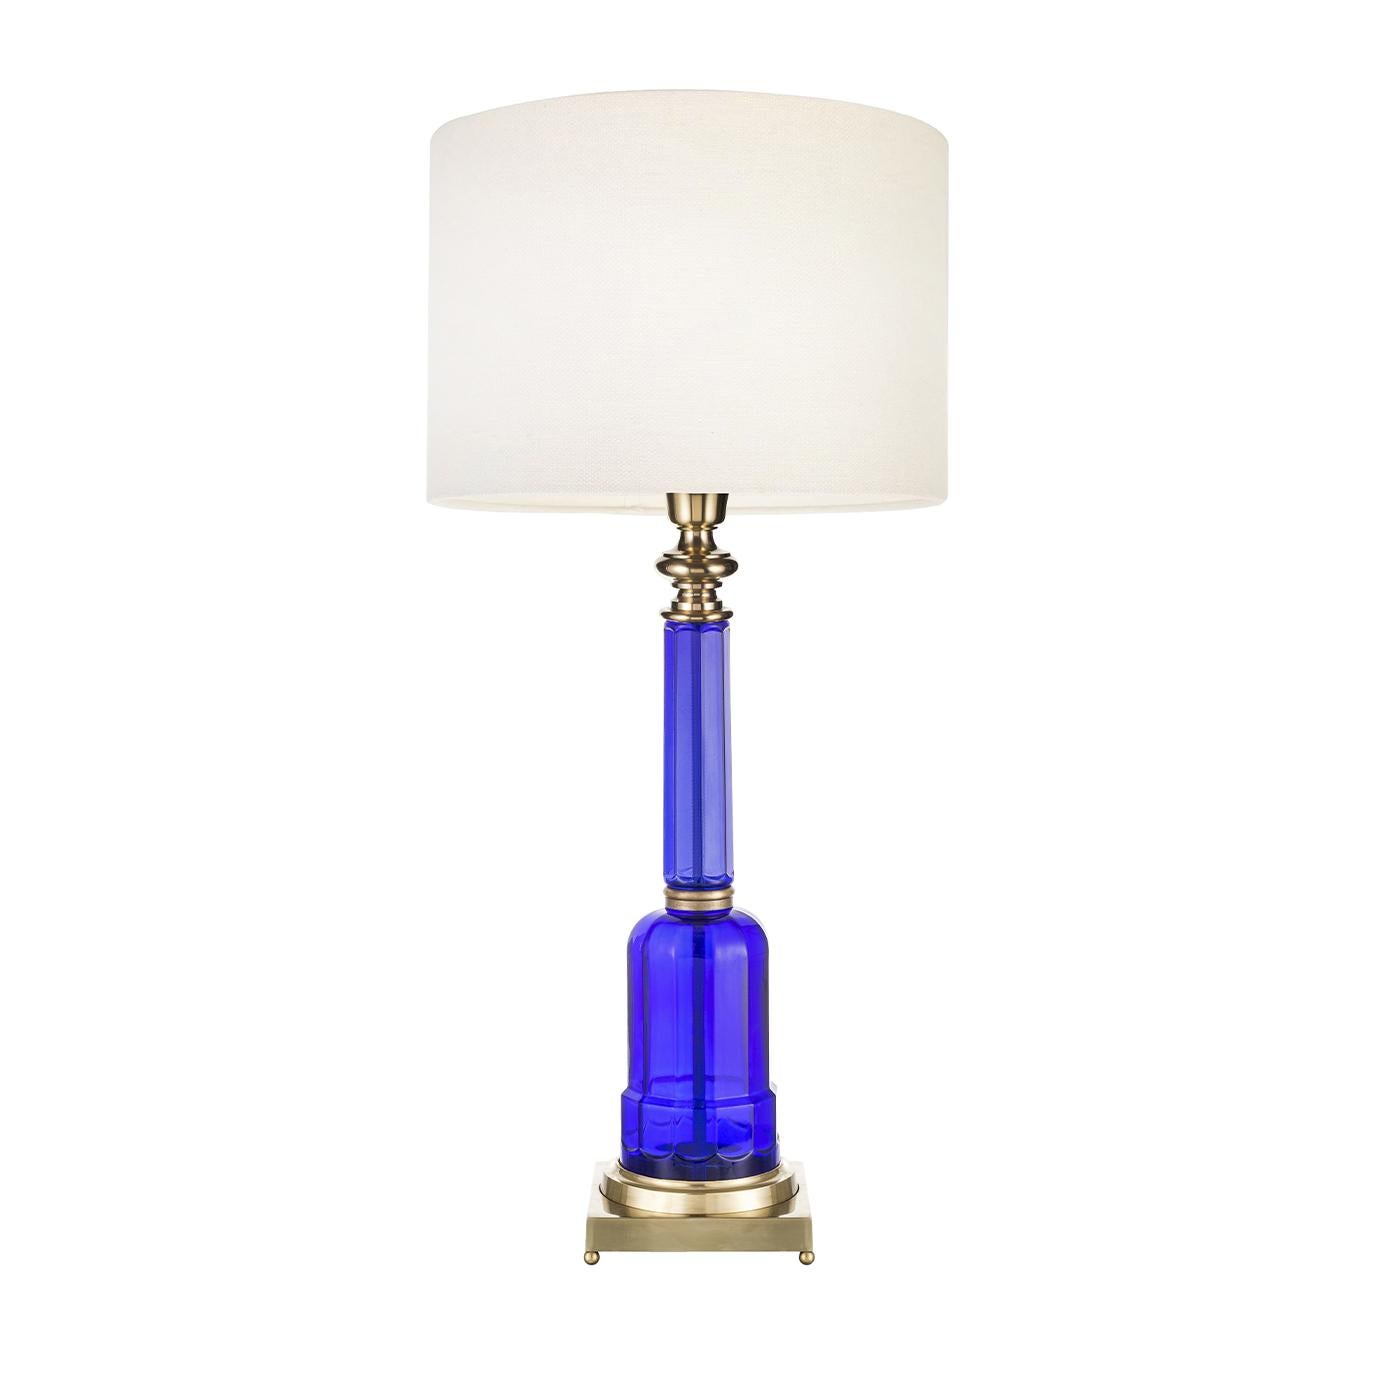 This striking Novecento lamp in a luxurious deep blue is a beautifully decorative item in brass and colored glass. The 17 cm square pedestal with golden ball feet support the glass body of the lamp and the lampshade in clear fabric is covered with